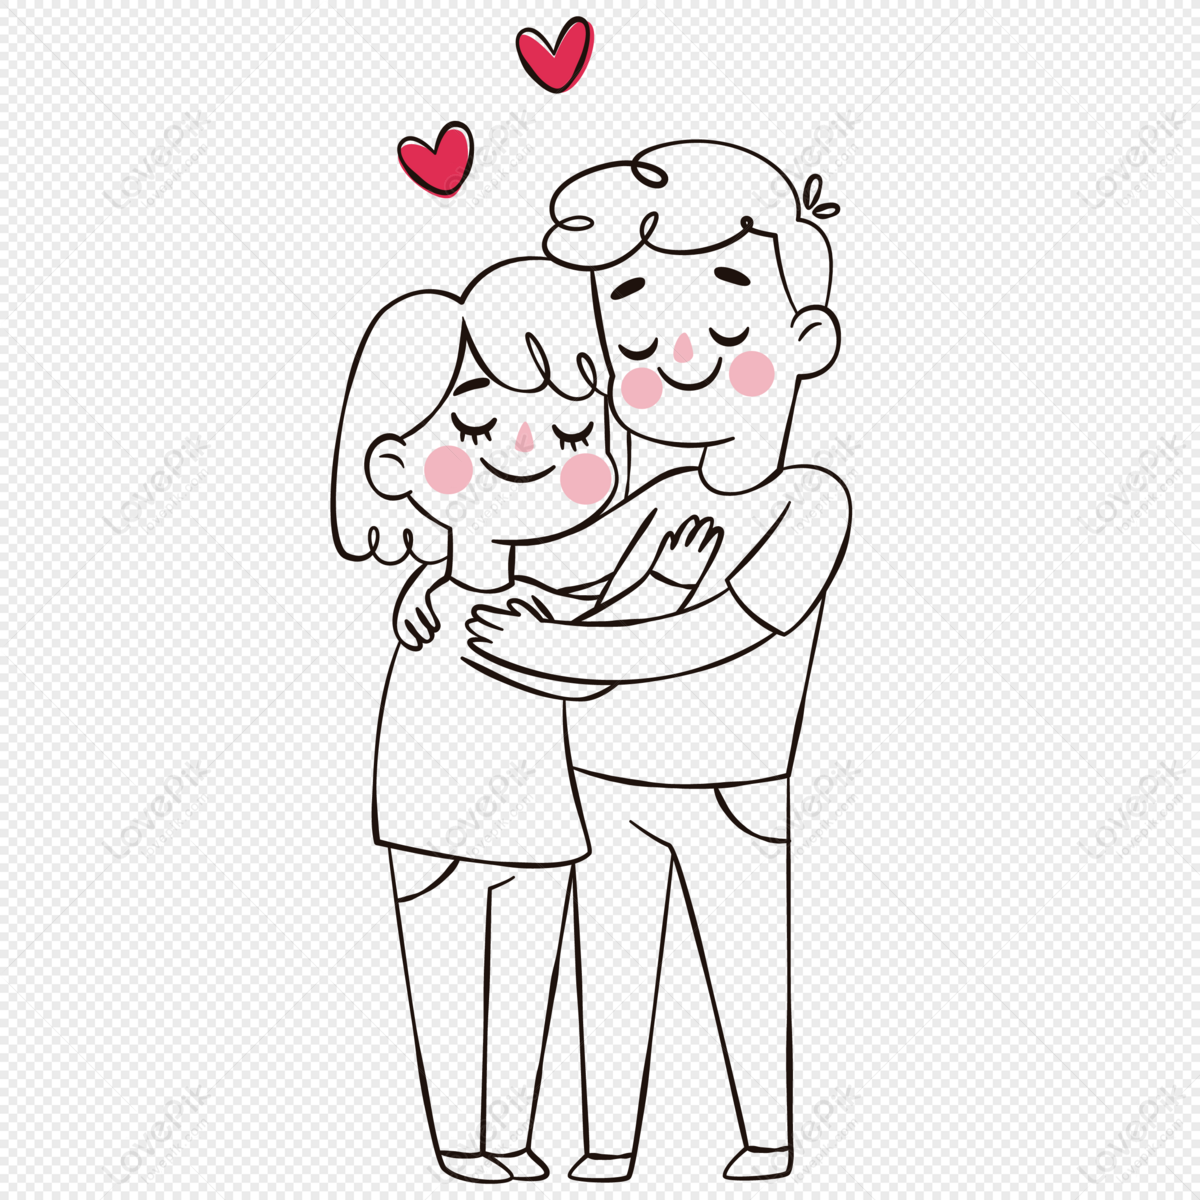 Simple Line Drawing Couples Embrace Each Other Sweetly PNG Image And